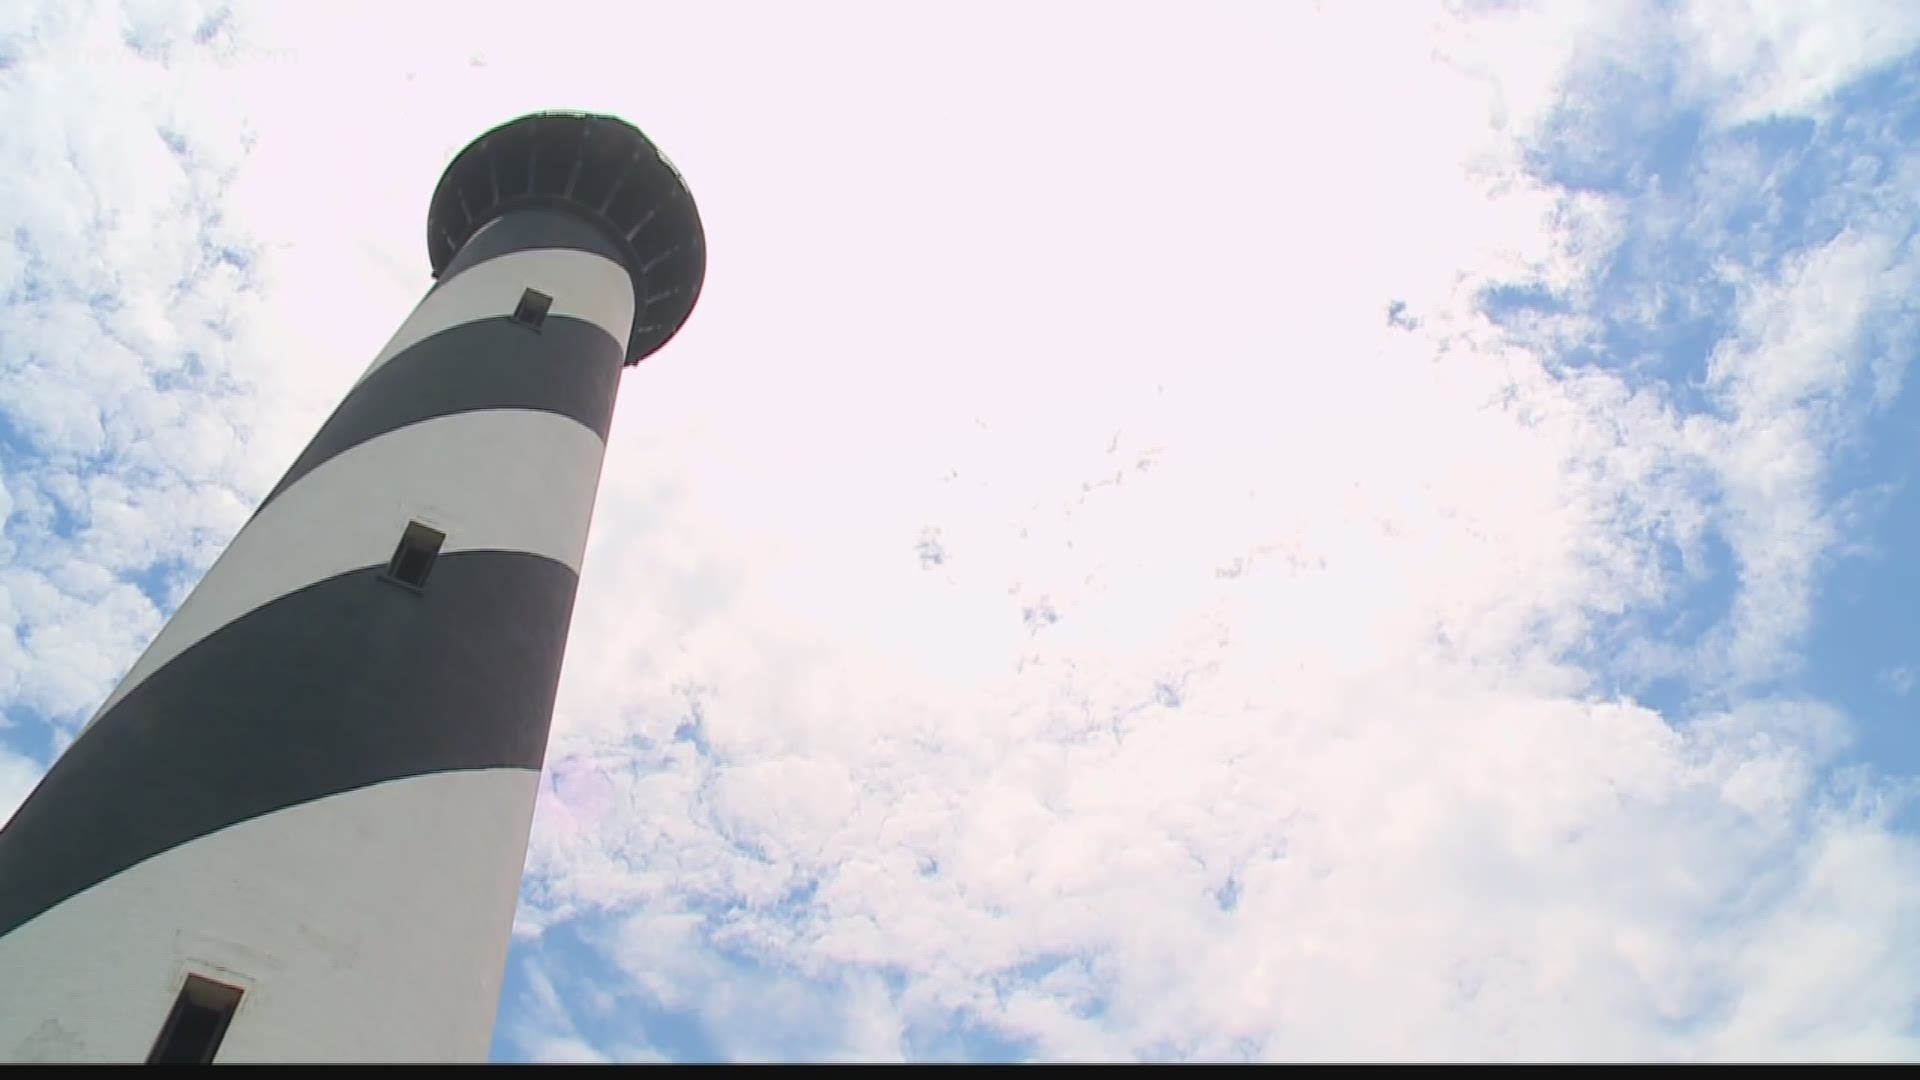 A landmark in Outer Banks was vandalized.